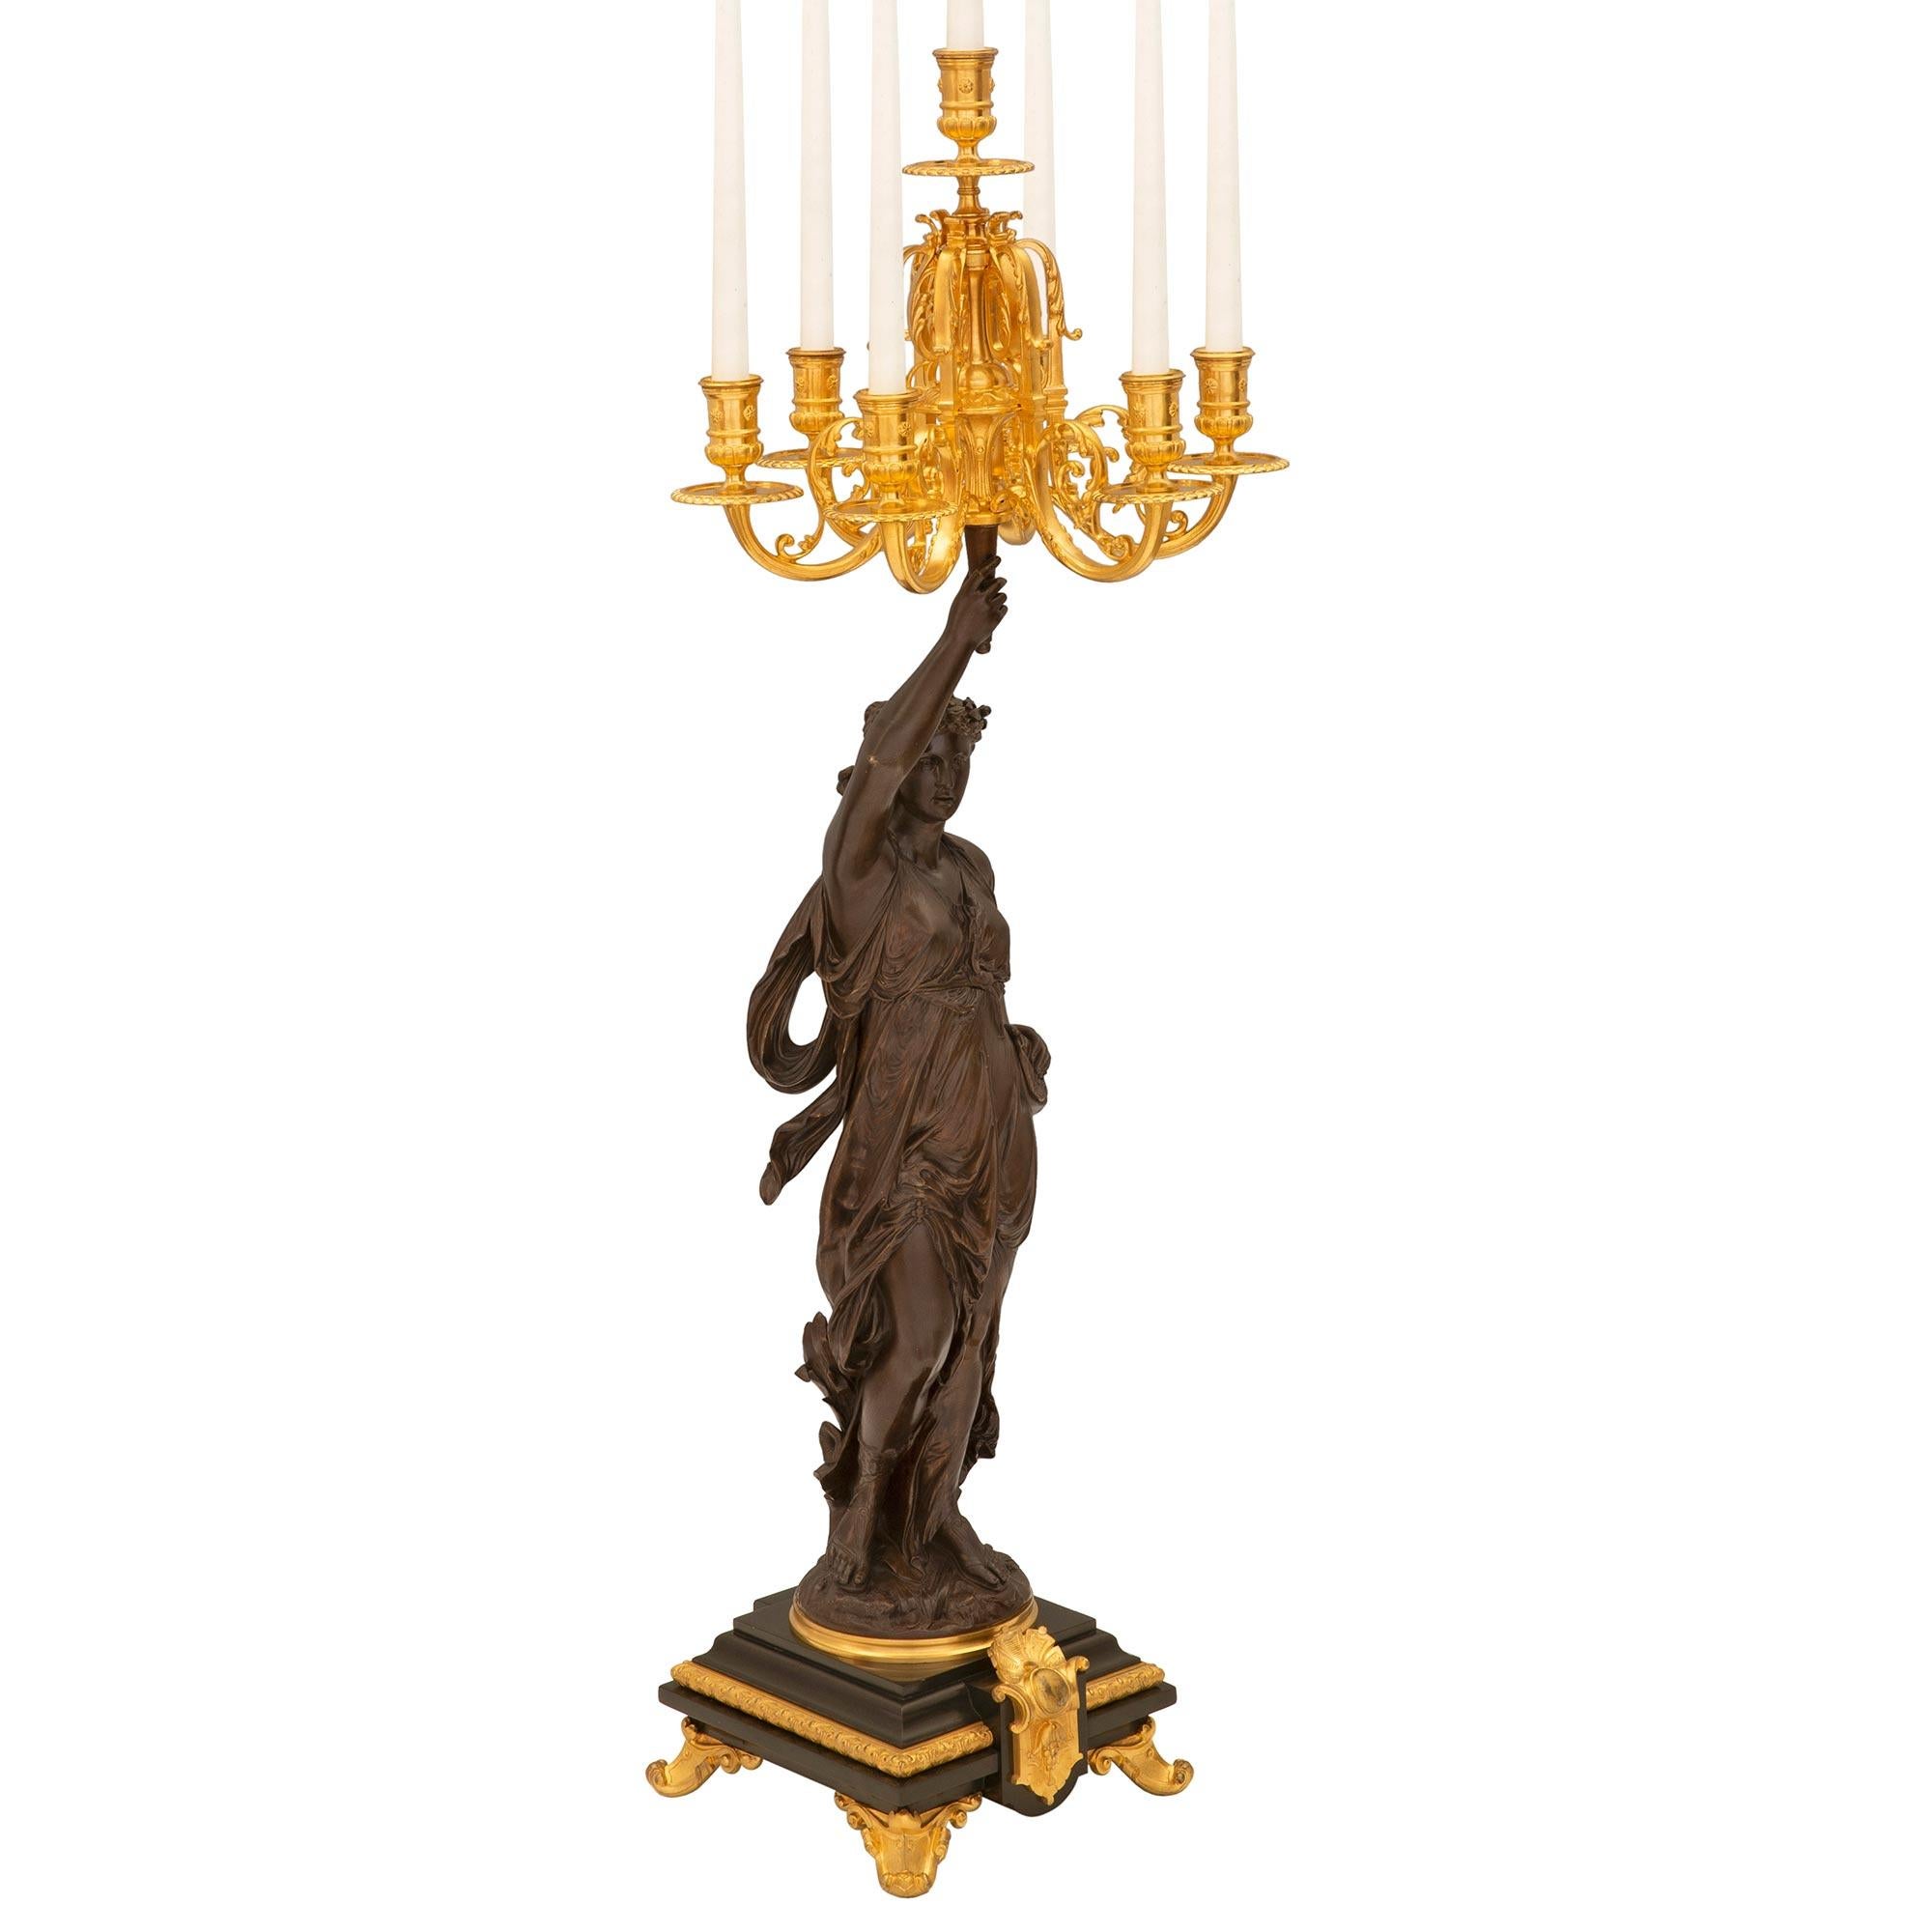 An impressive and high quality true pair of French 19th century Renaissance st. patinated bronze, ormolu, and black Belgian marble candelabras signed Grêgoire. Each seven arm candelabra is raised by elegant scrolled ormolu feet below the striking